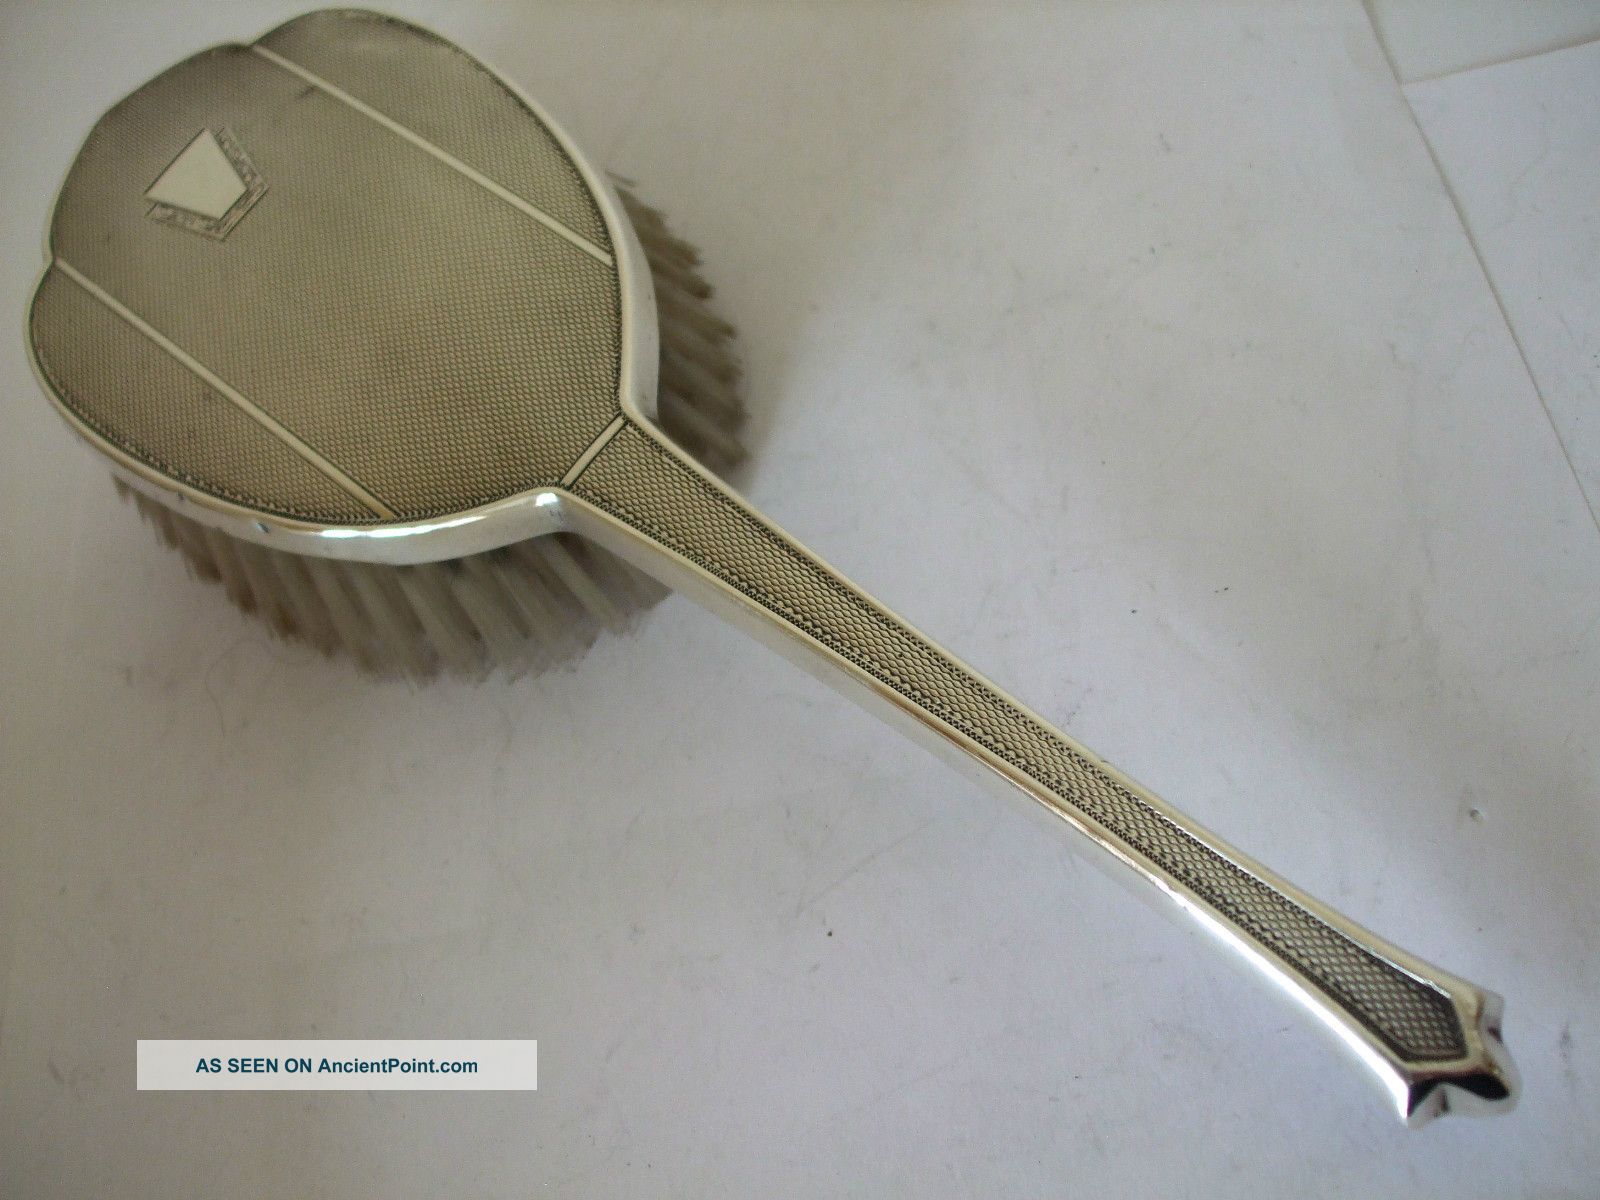 Vintage Silver Hair Brush 1962 Art Deco Stepped Design Engine Turned Decoration Brushes & Grooming Sets photo